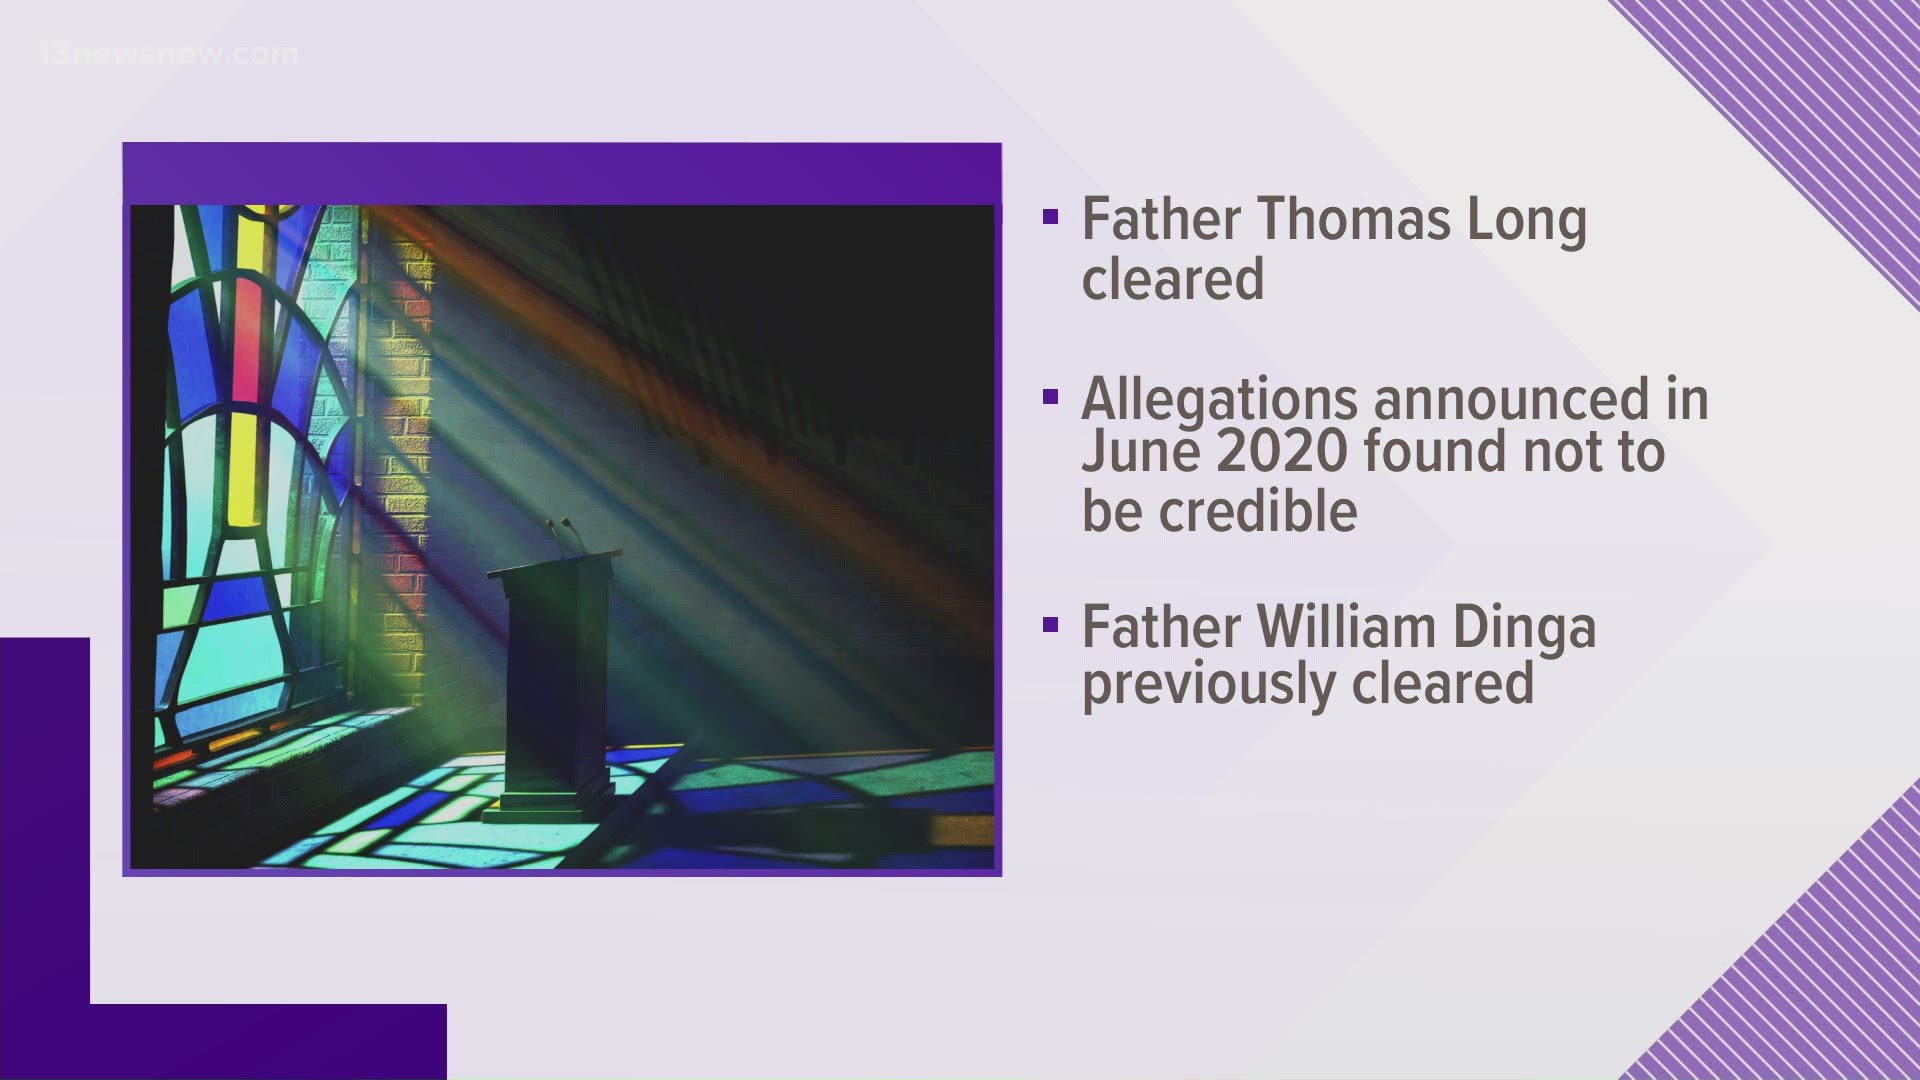 The Richmond Diocese has cleared Father Thomas Long of abuse allegations.